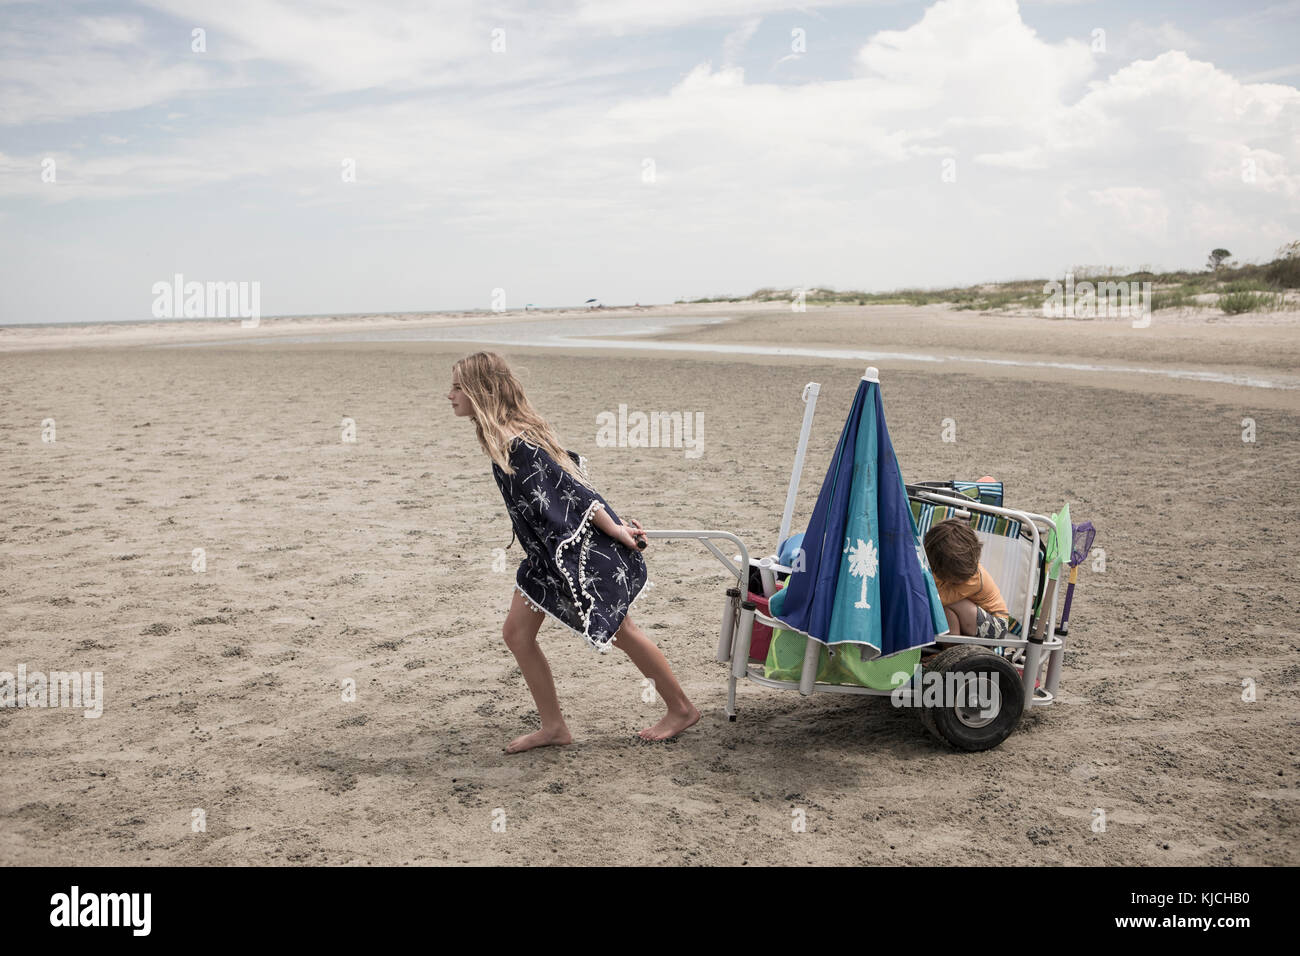 Girl pulling brother in cart on beach Stock Photo